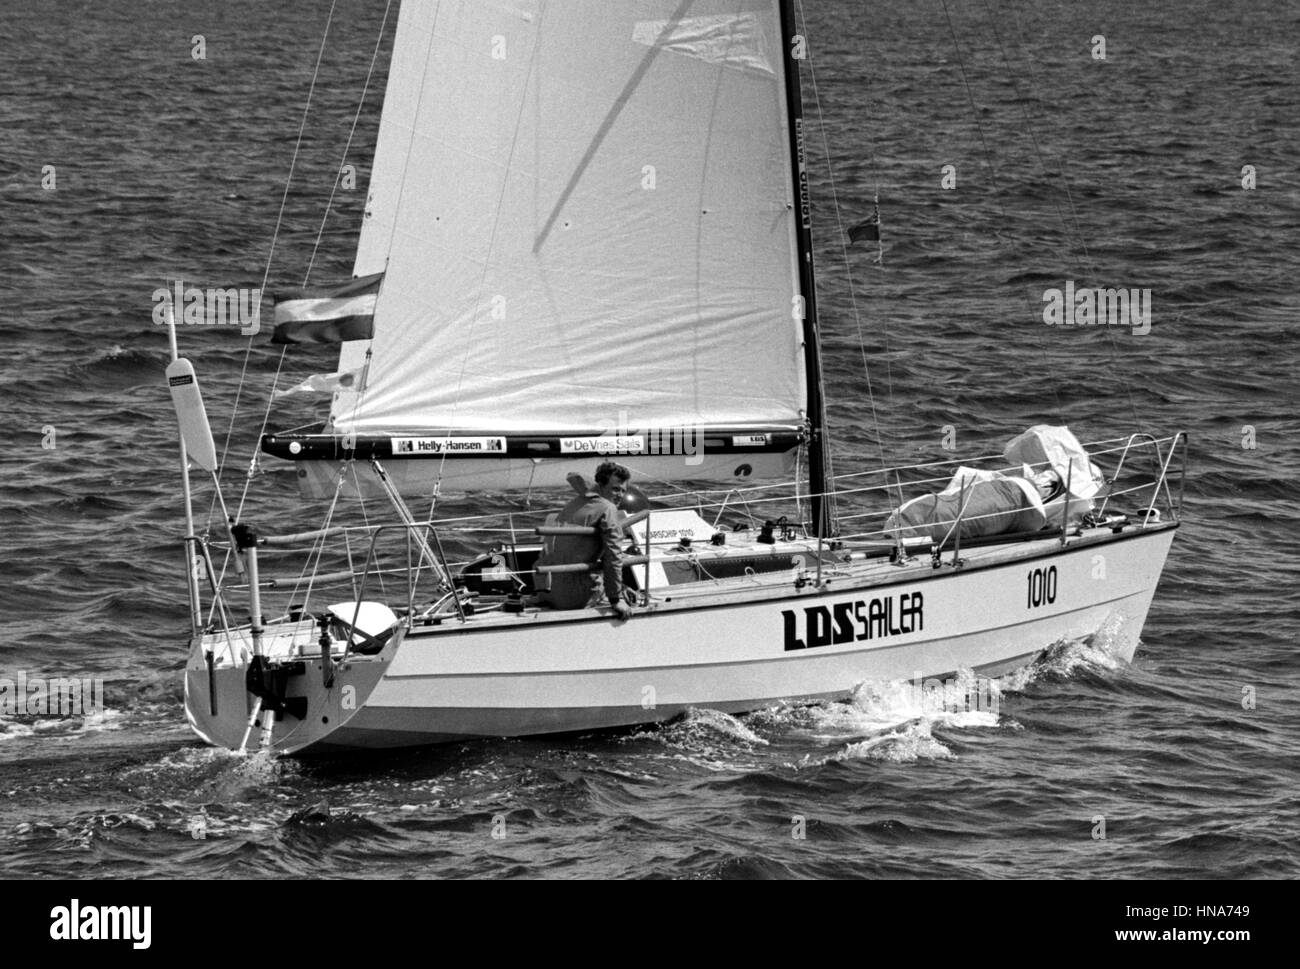 AJAXNETPHOTO. 2 JUNE,1984.PLYMOUTH, ENGLAND. -OSTAR RACE-  LDS SAILER SKIPPERED BY HENK JUKKEMA (NED) PLACED 38TH OVERALL. PHOTO:AJAX NEWS PHOTOS  REF:840206 29 Stock Photo